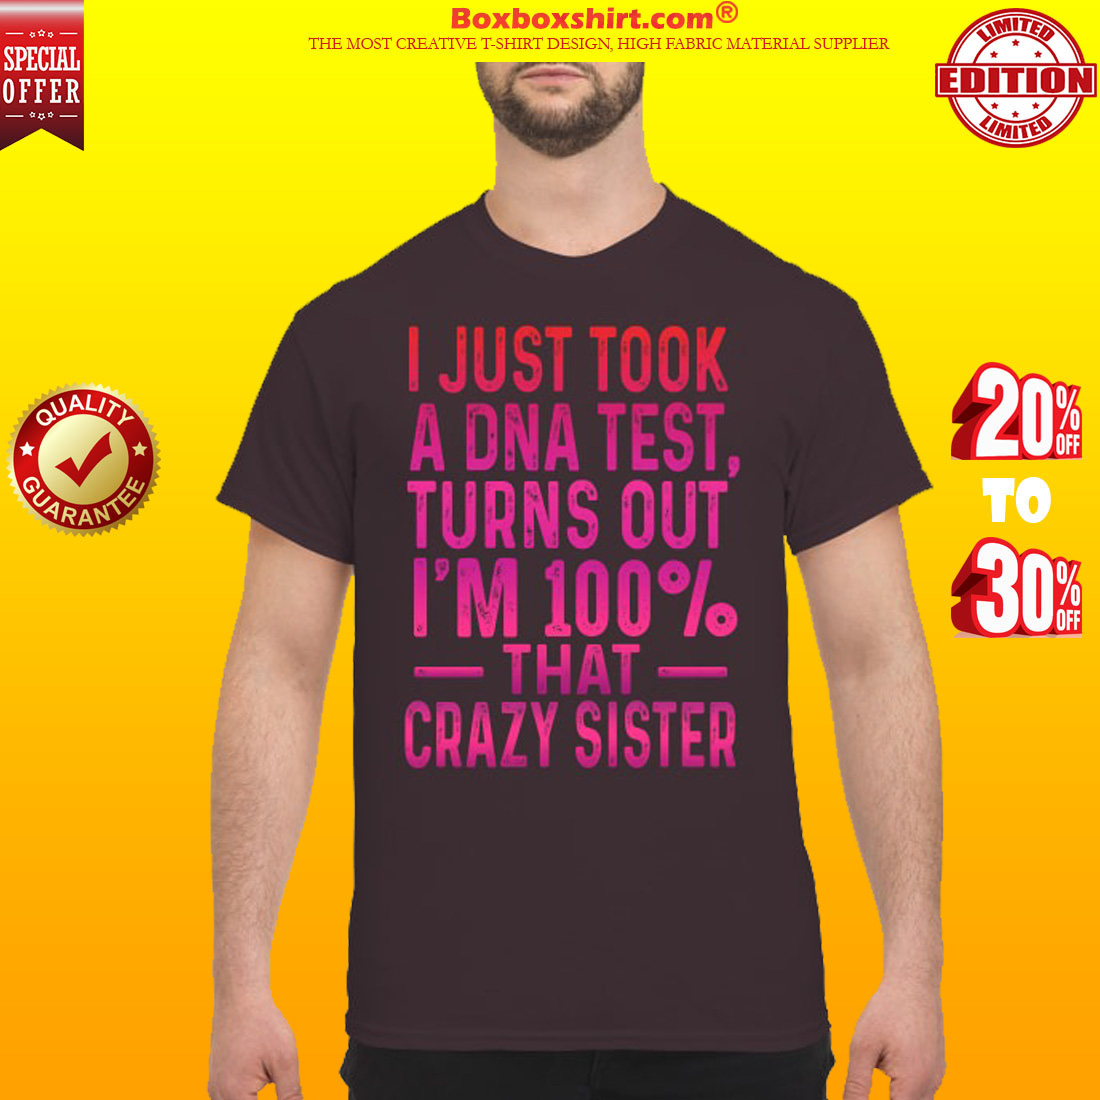 I just took a DNA test turns out I'm 100% that crazy sister classic shirt